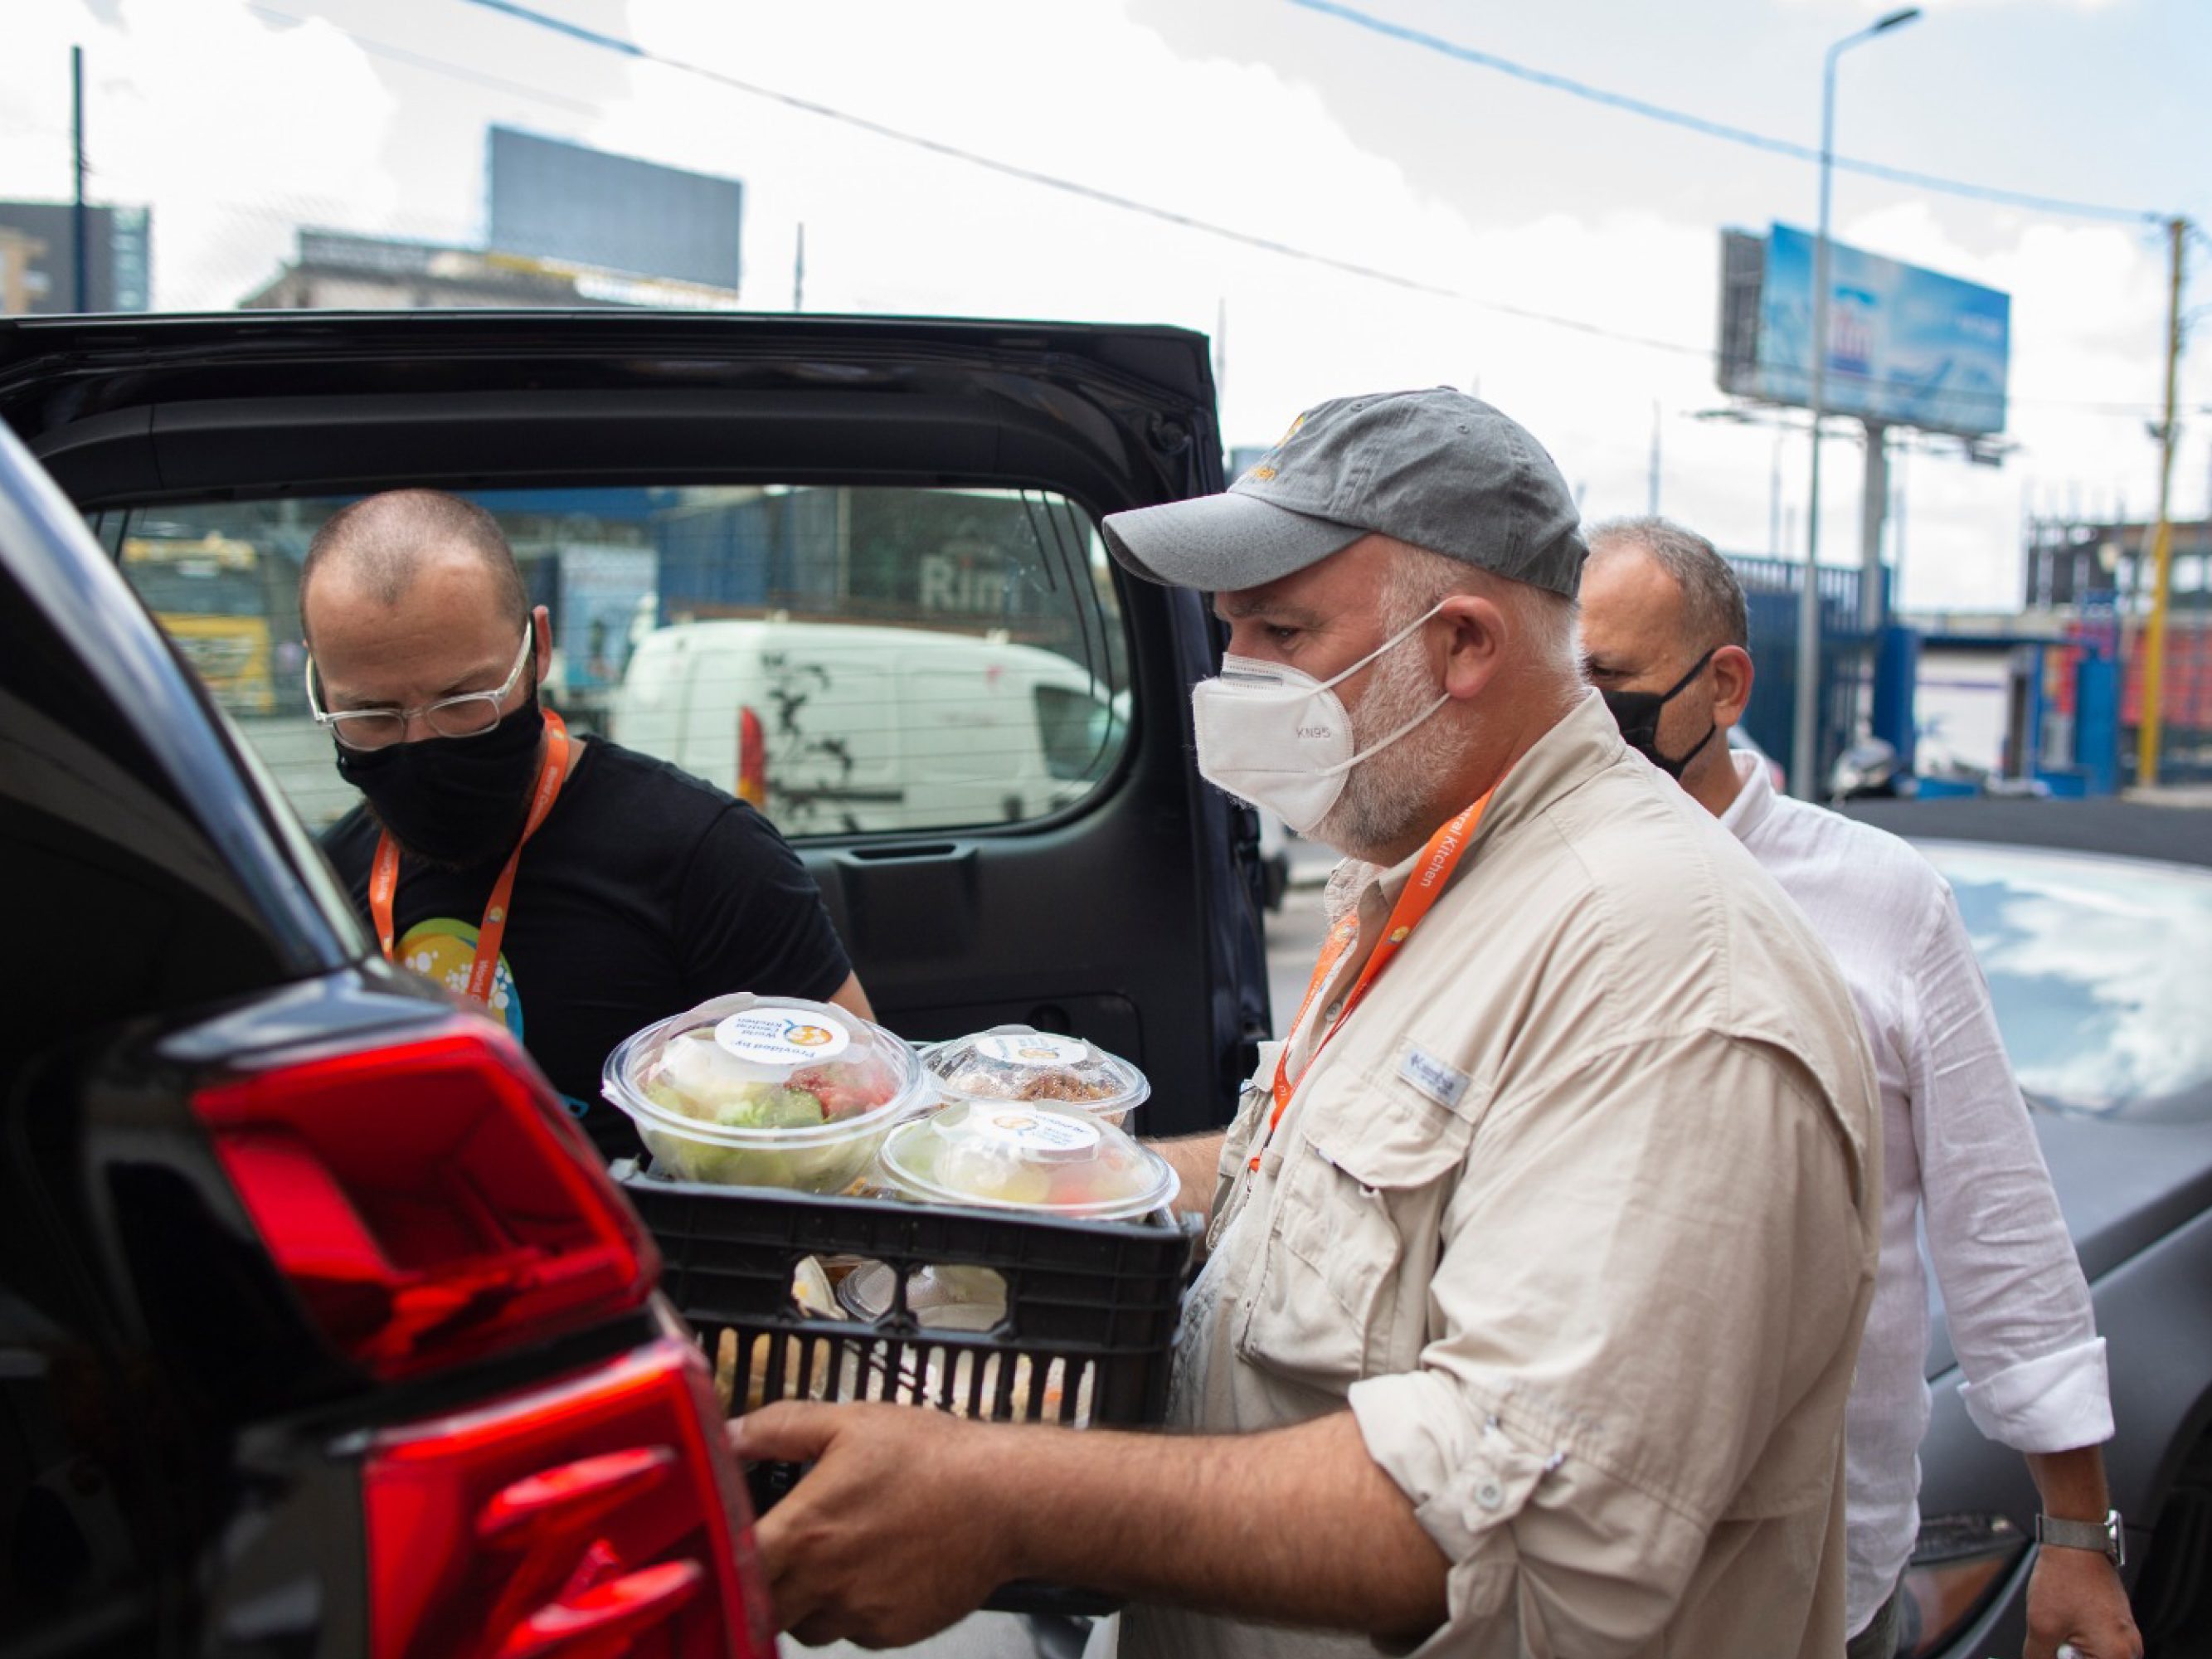 World Central Kitchen Founder, José Andrés in the midst of Disaster Relief delivery for victims of an explosion in Beirut, Lebanon.